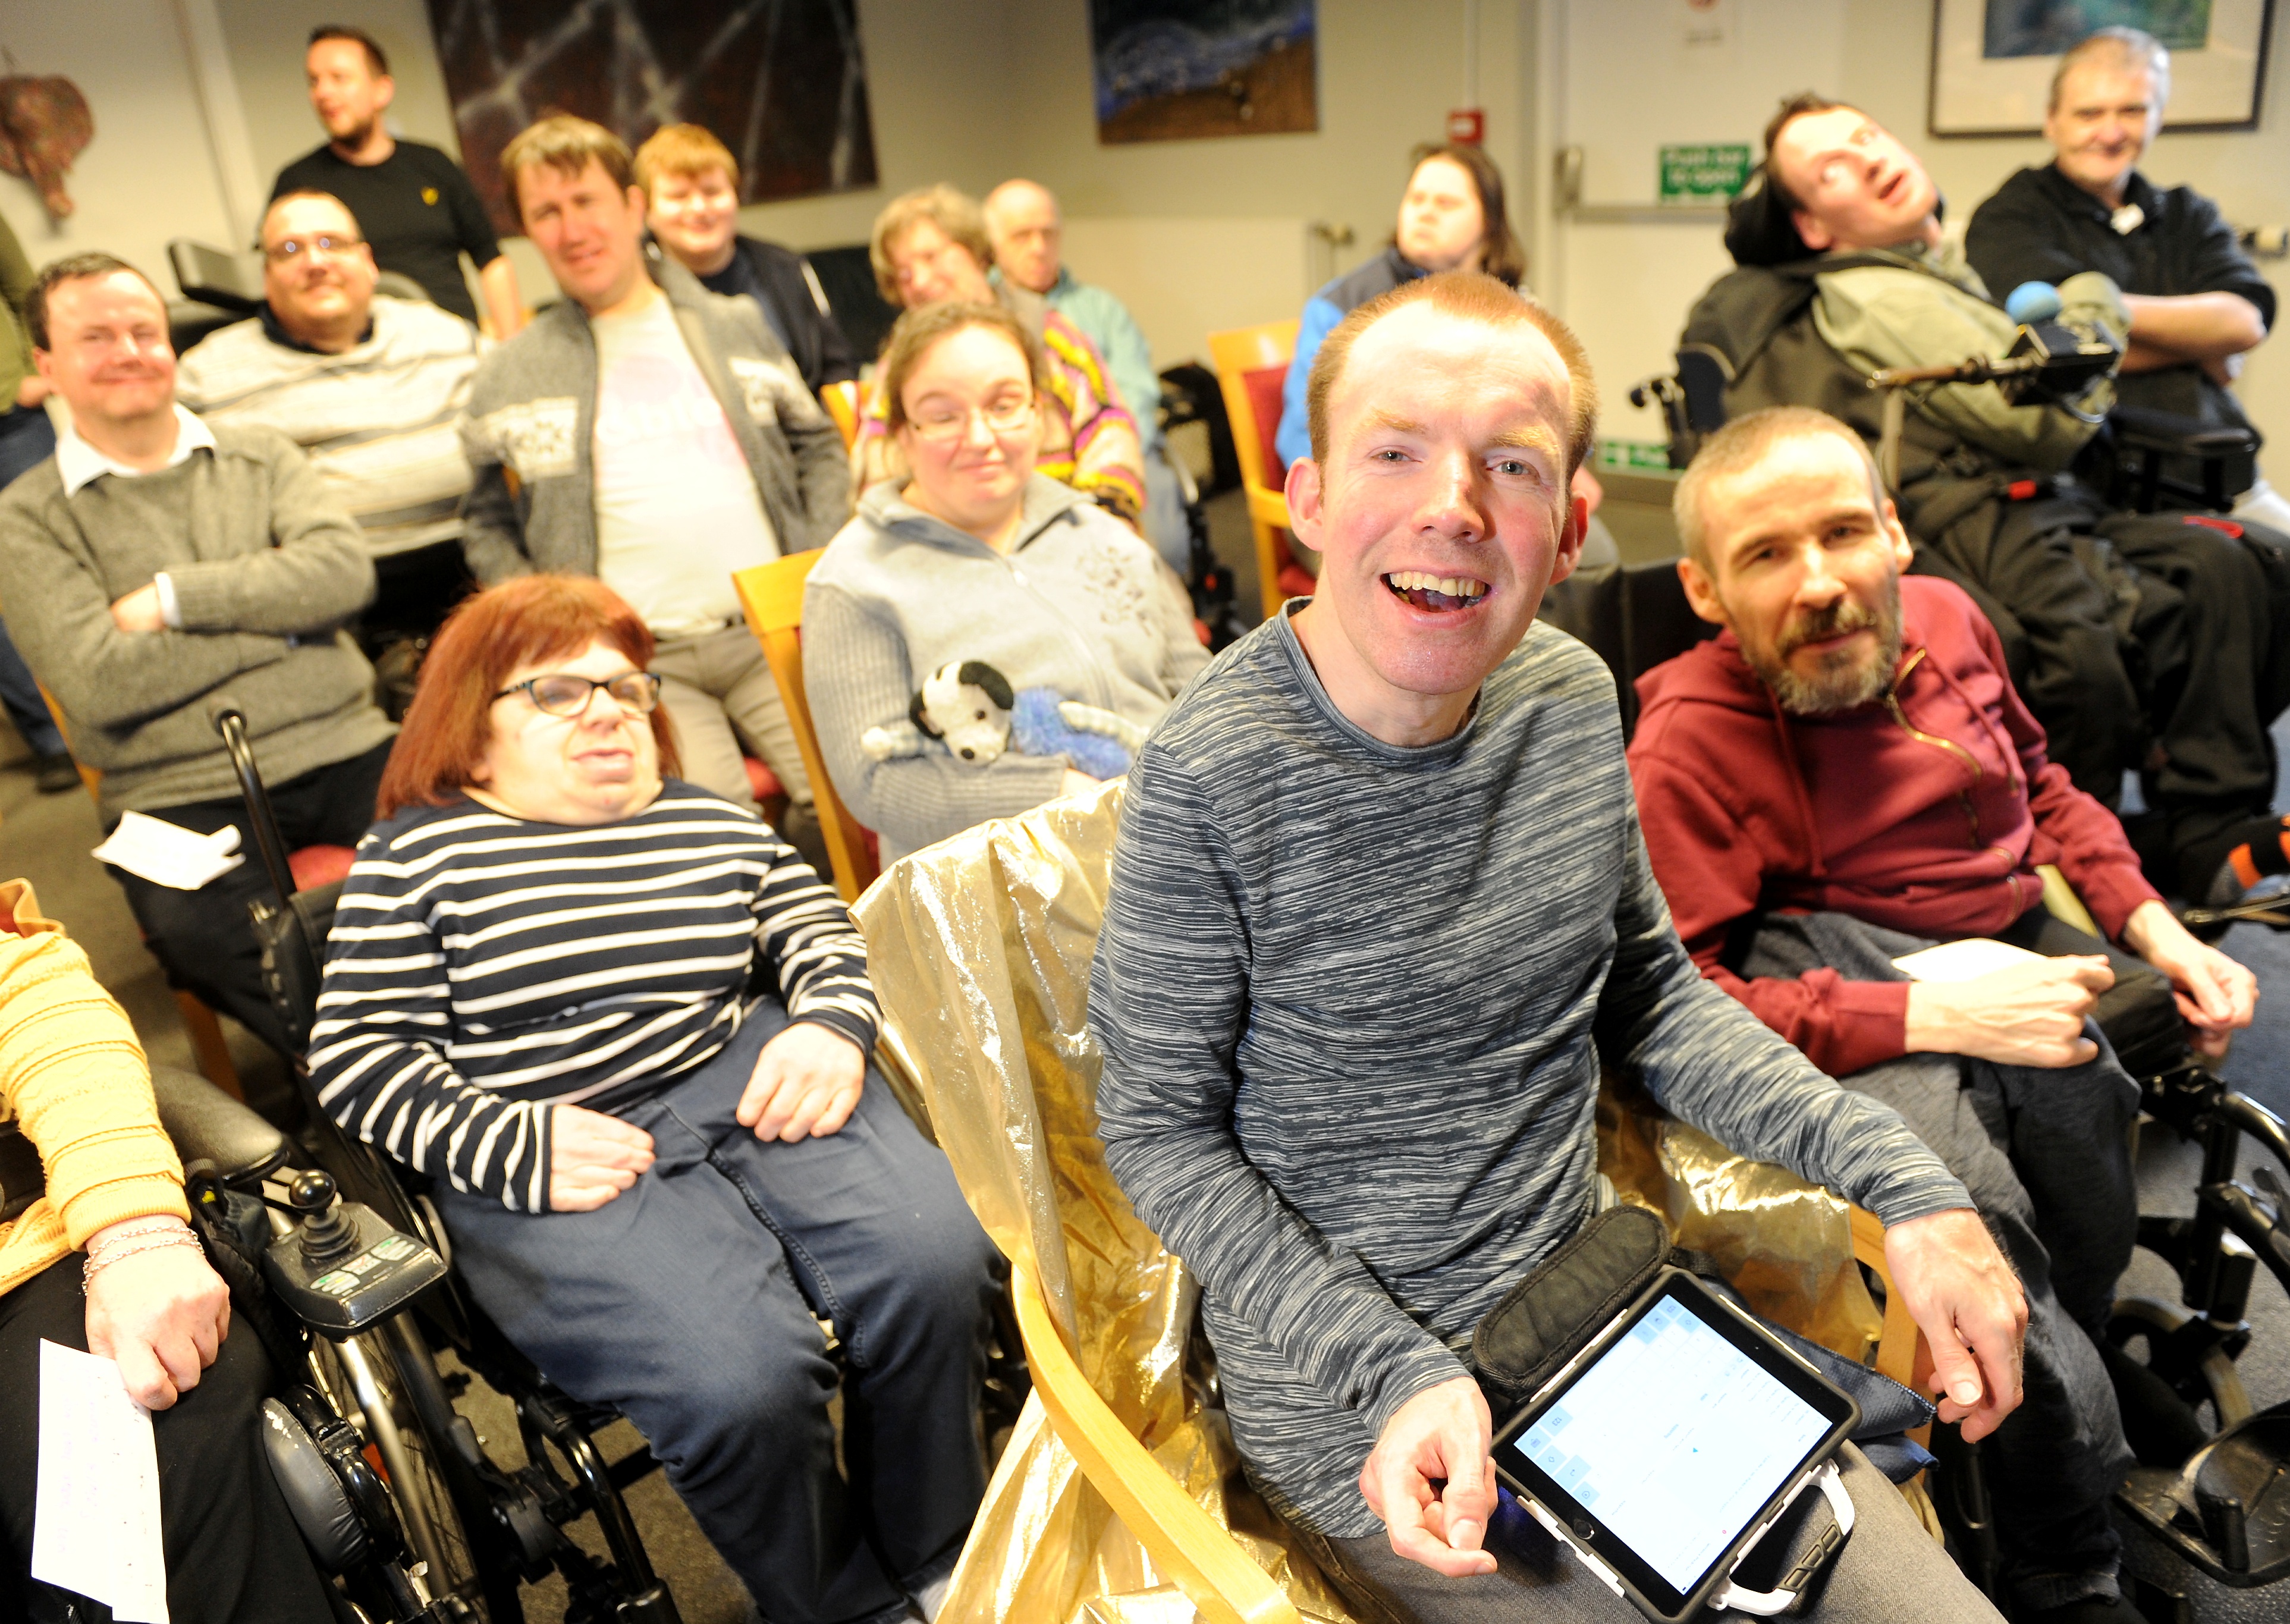 Comedian and winner of Britains Got Talent, Lee Ridley visited the residents of the Leonard Cheshire house in Inverness following his show in Eden Court on Tuesday evening.